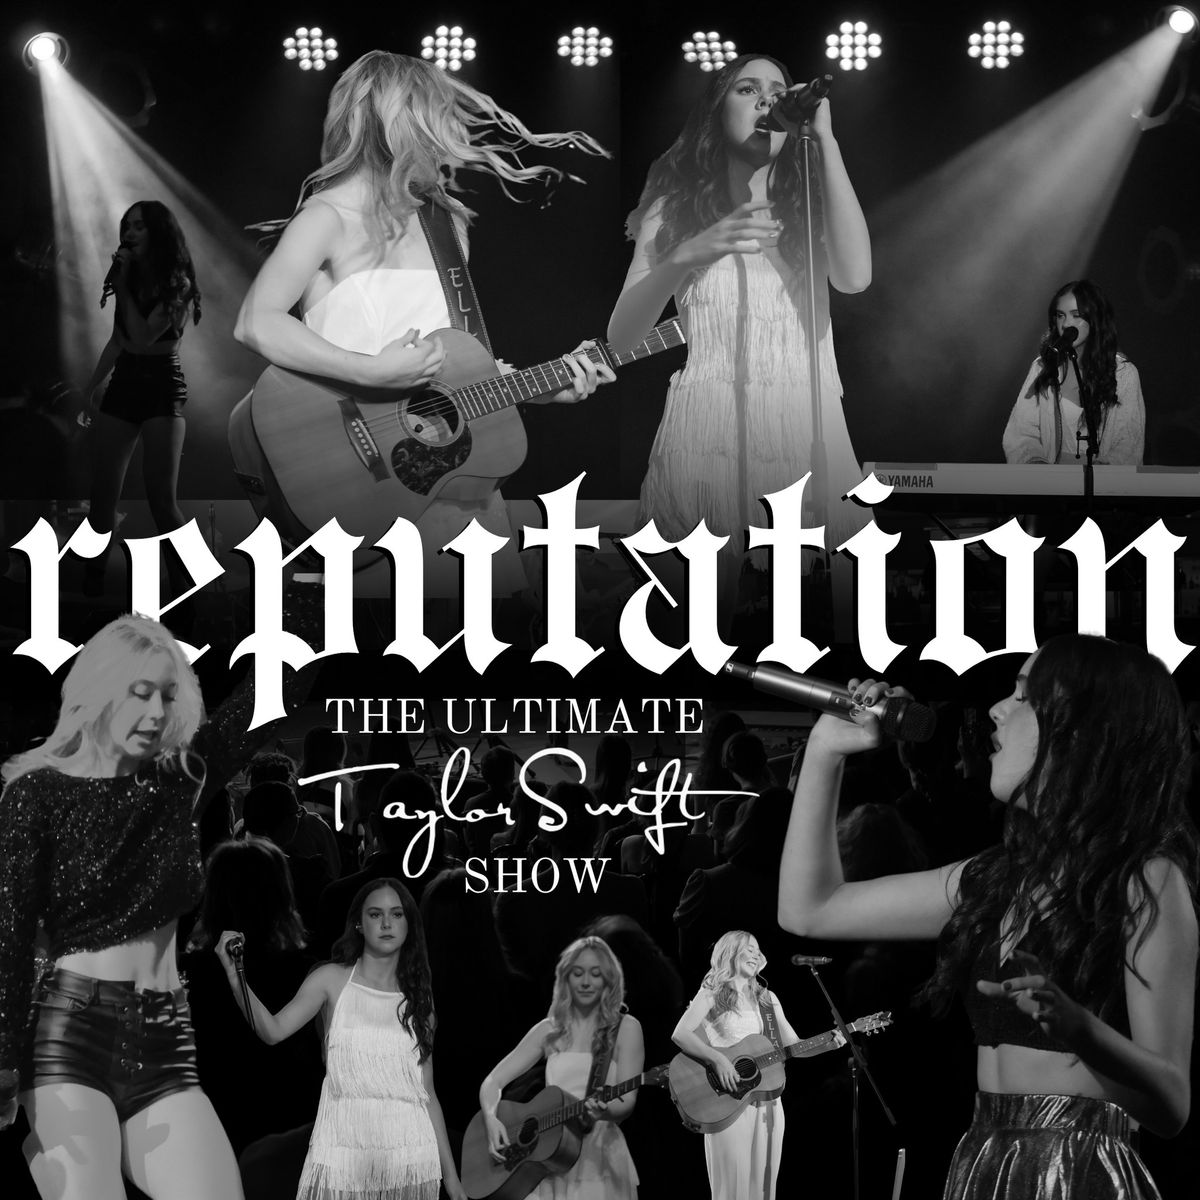 REPUTATION: The Ultimate Taylor Swift Show | TOWNSVILLE, QLD